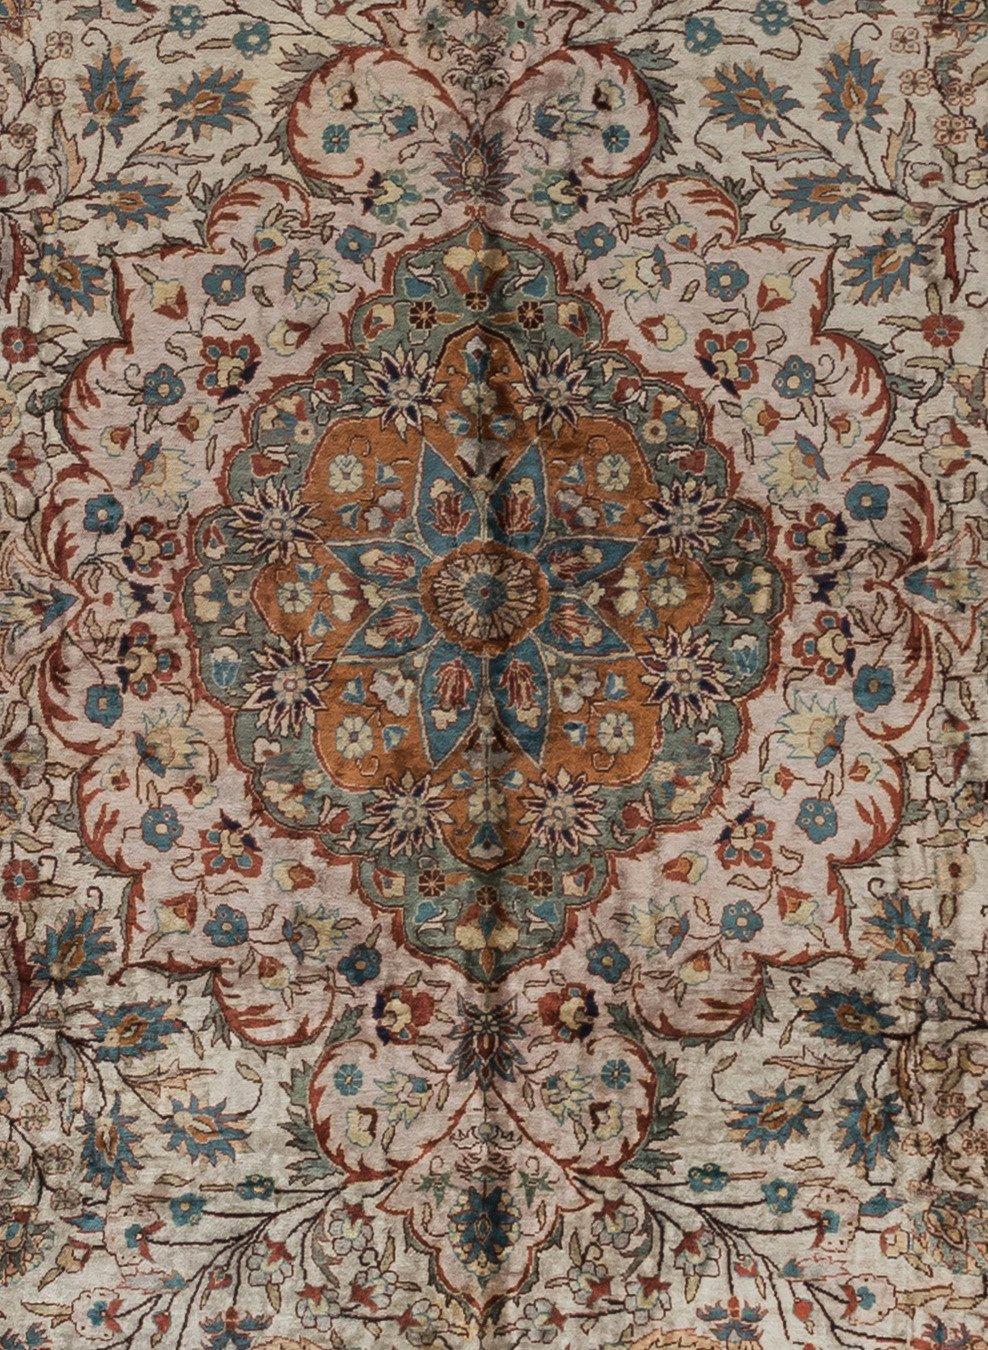 Pristine and finely woven antique metallic Kayseri silk carpet from the 1940s Turkey measuring: 7.2 x 10.3 ft.

Provence:
Christie's Auction House, New York, NY.